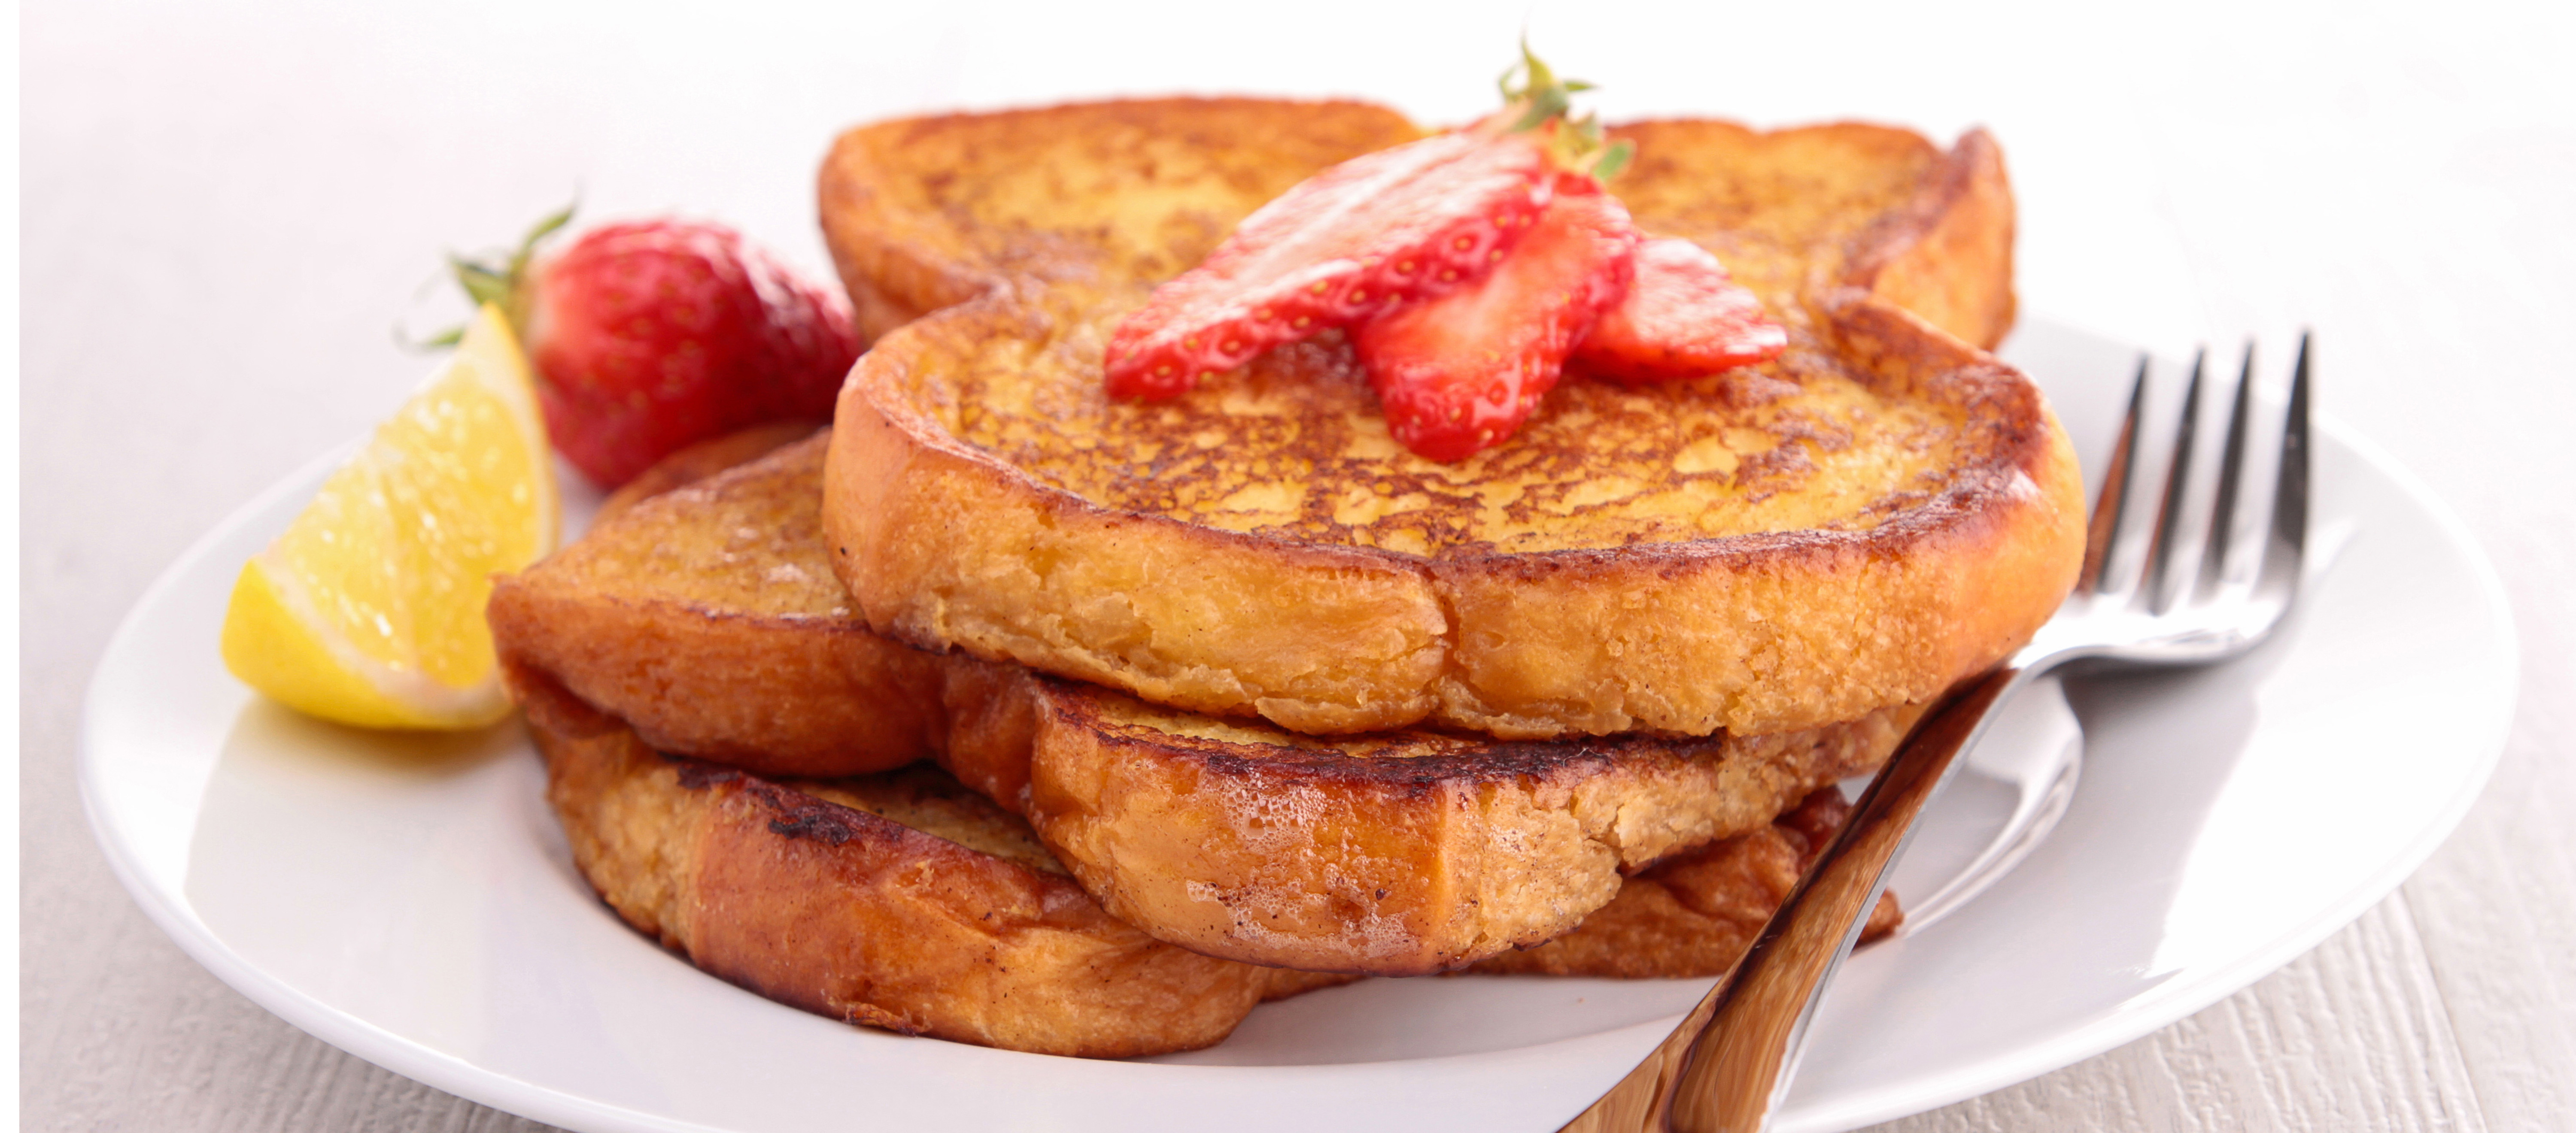 Image of Cinnamon French Toast